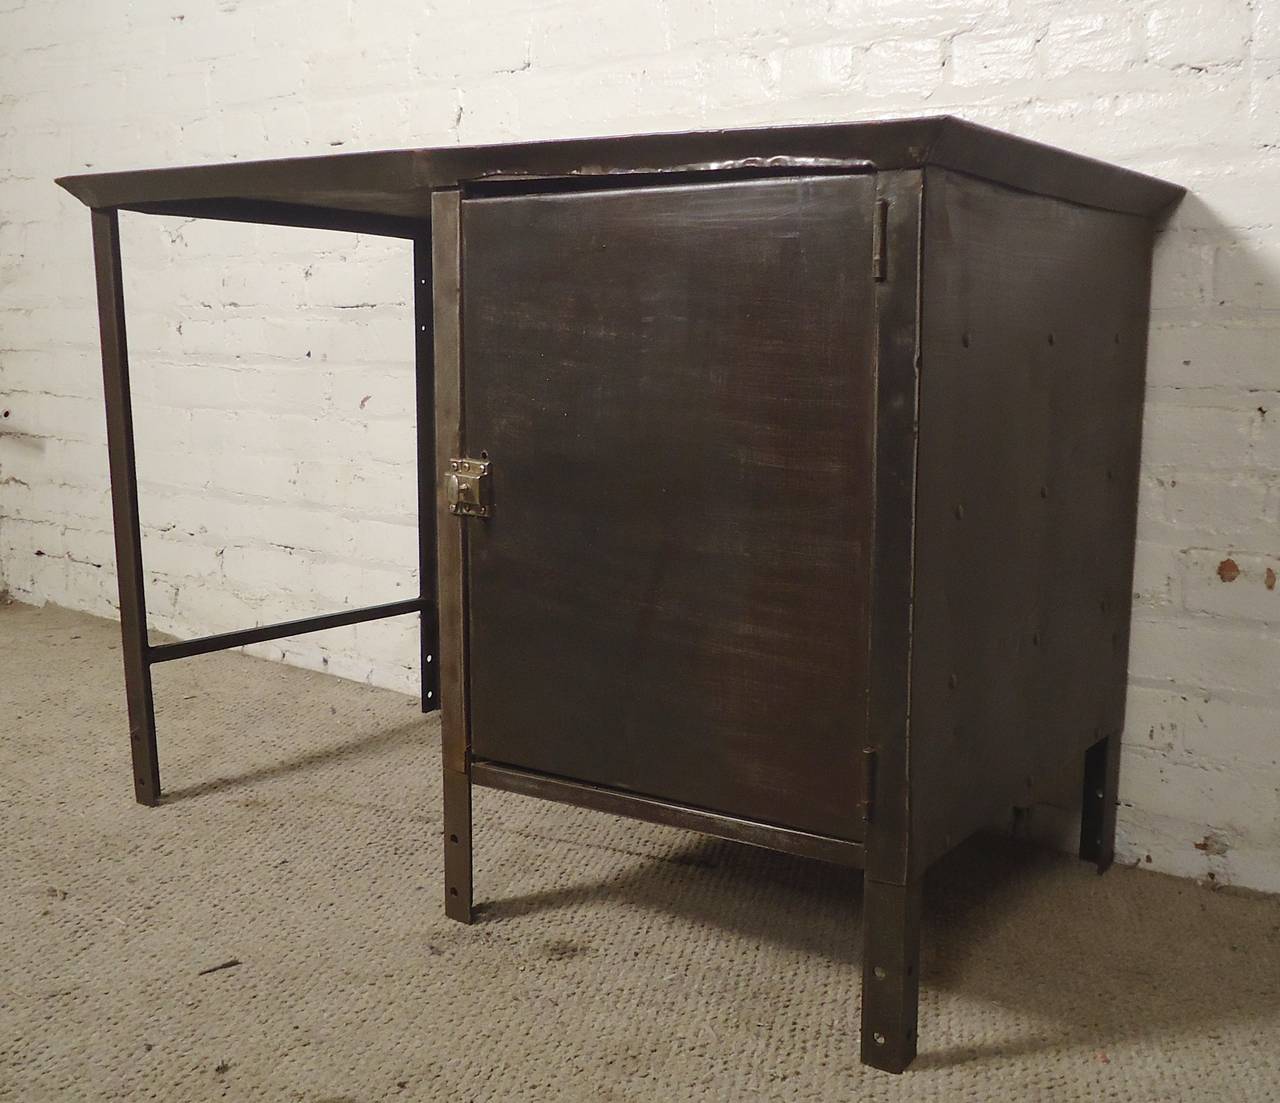 Vintage metal writing desk with a cool industrial appearance. Side door with three shelves, plus metal back that allows for center room placement.
Kneehole: 18"w 20"d 26"h

(Please confirm item location - NY or NJ - with dealer)